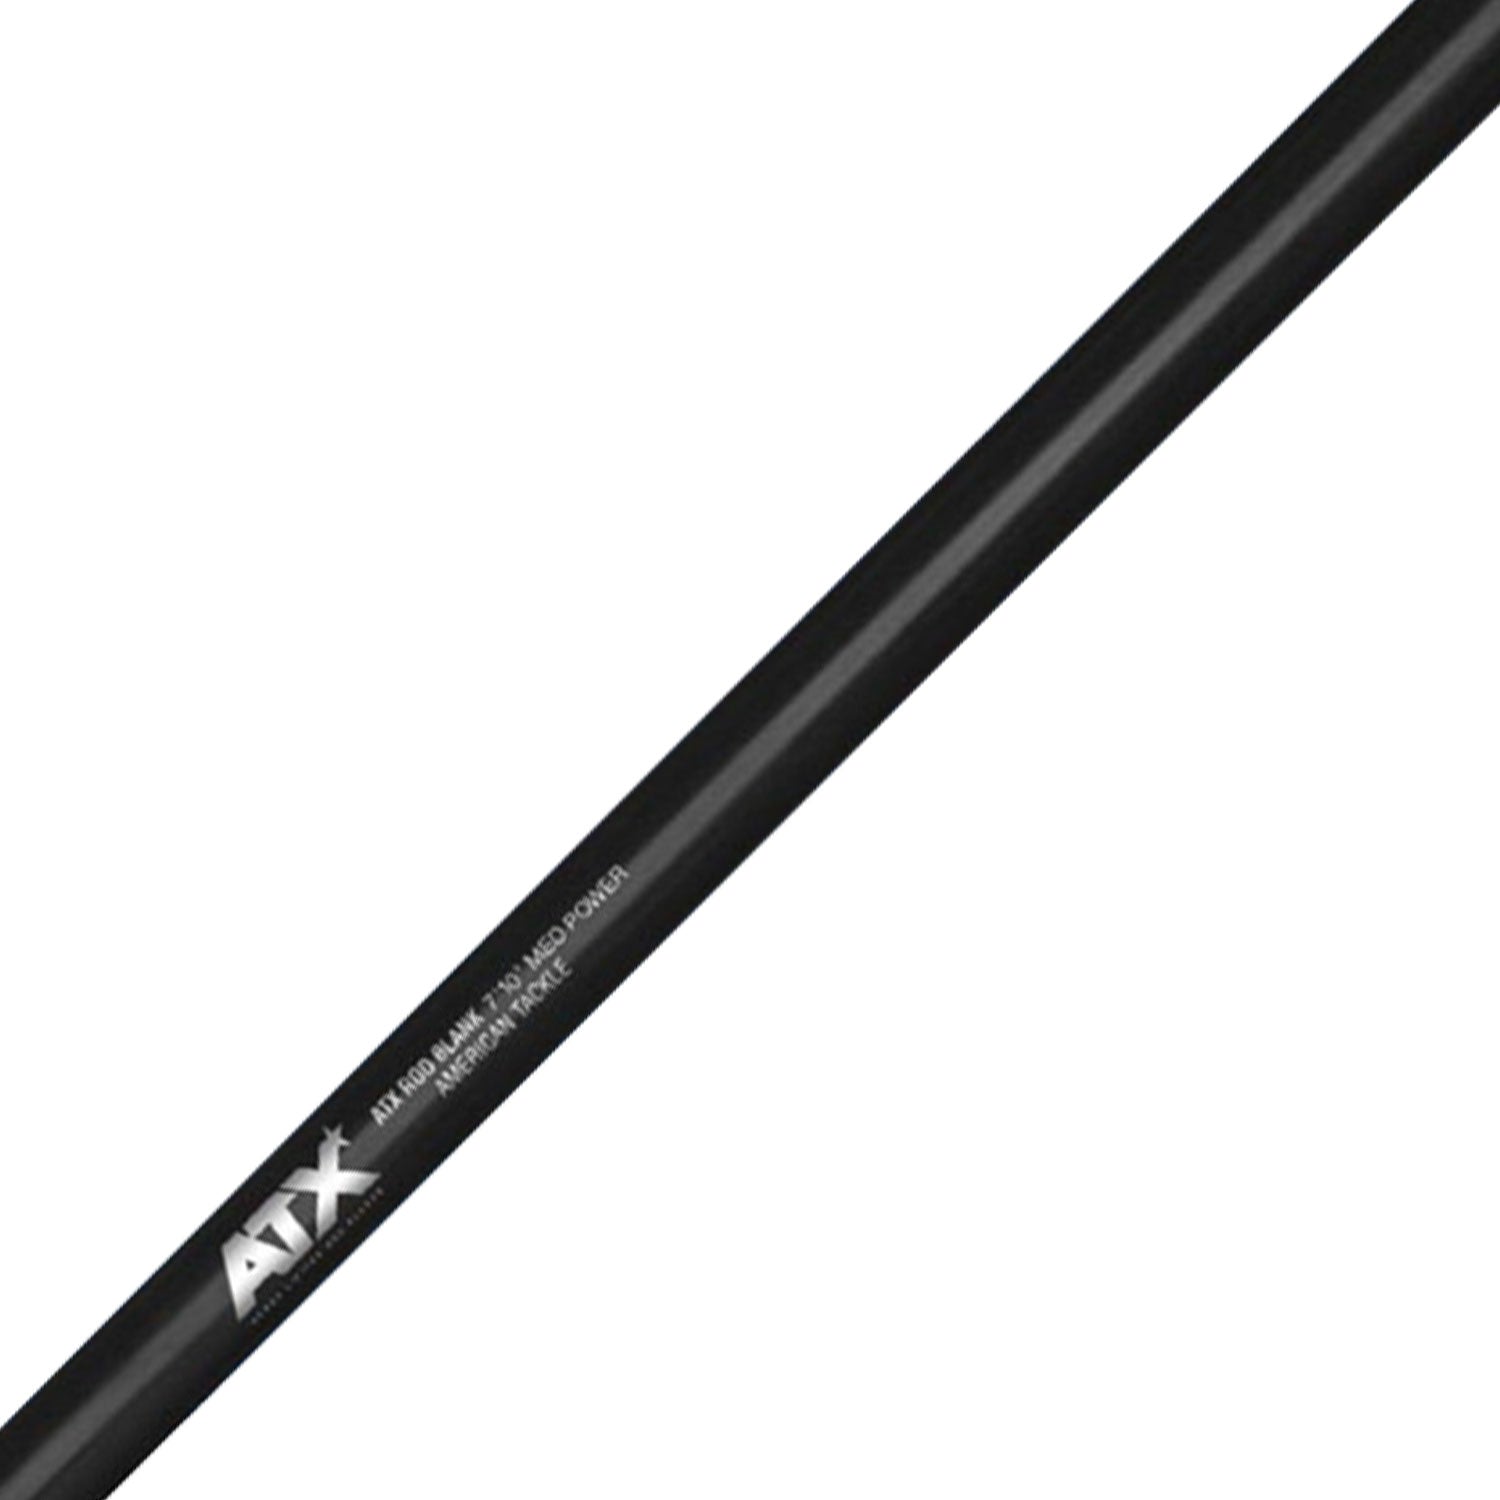 American Tackle AXGC66MH Graphite Composite Rod Blank